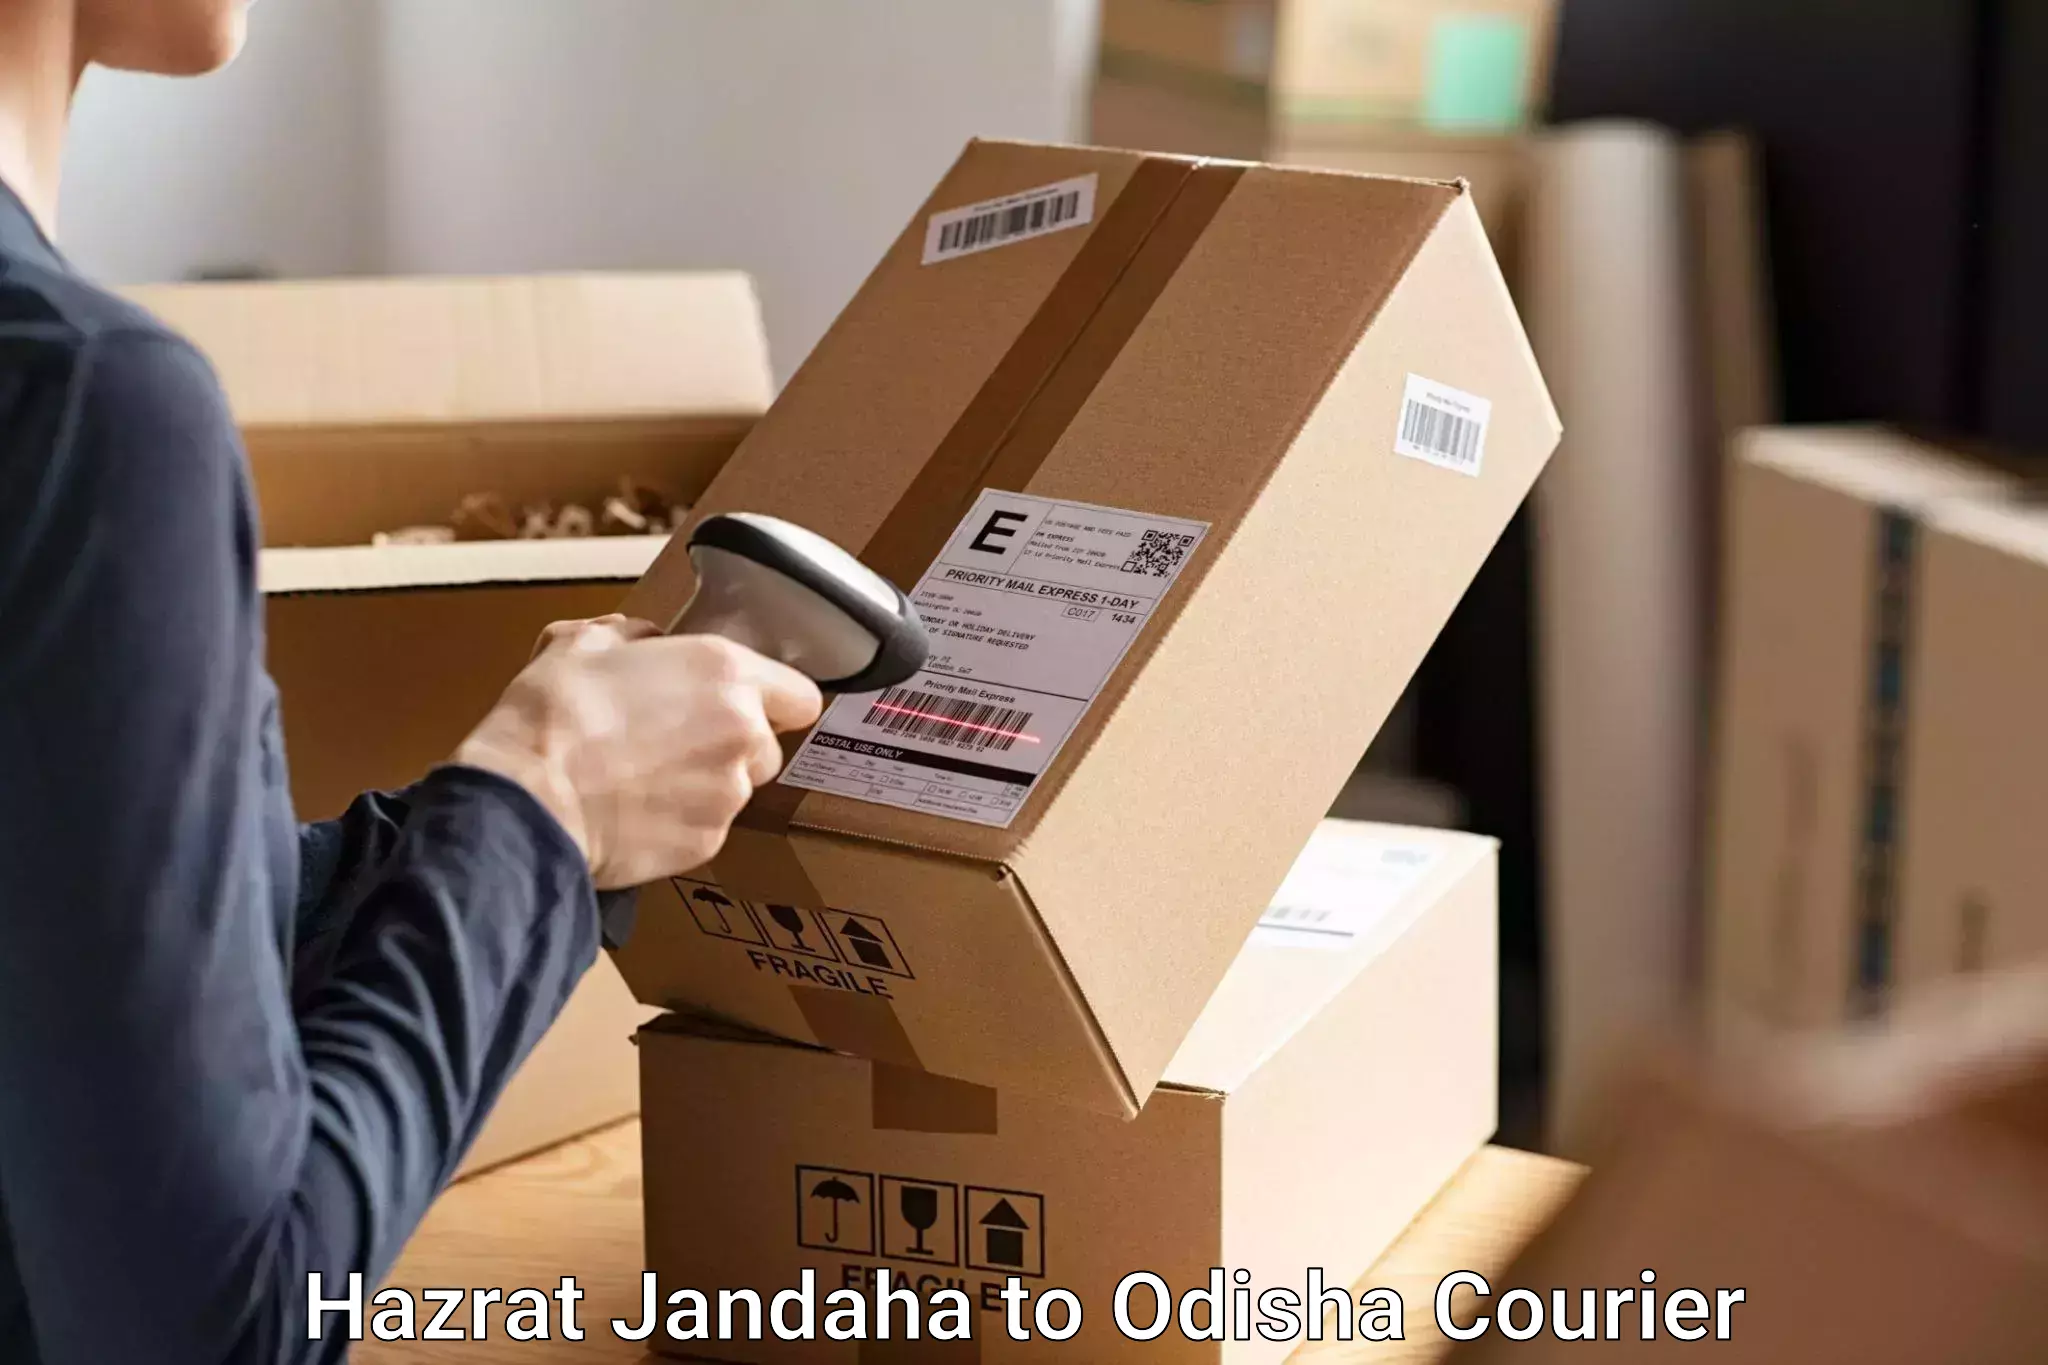 Personal effects shipping Hazrat Jandaha to Aul